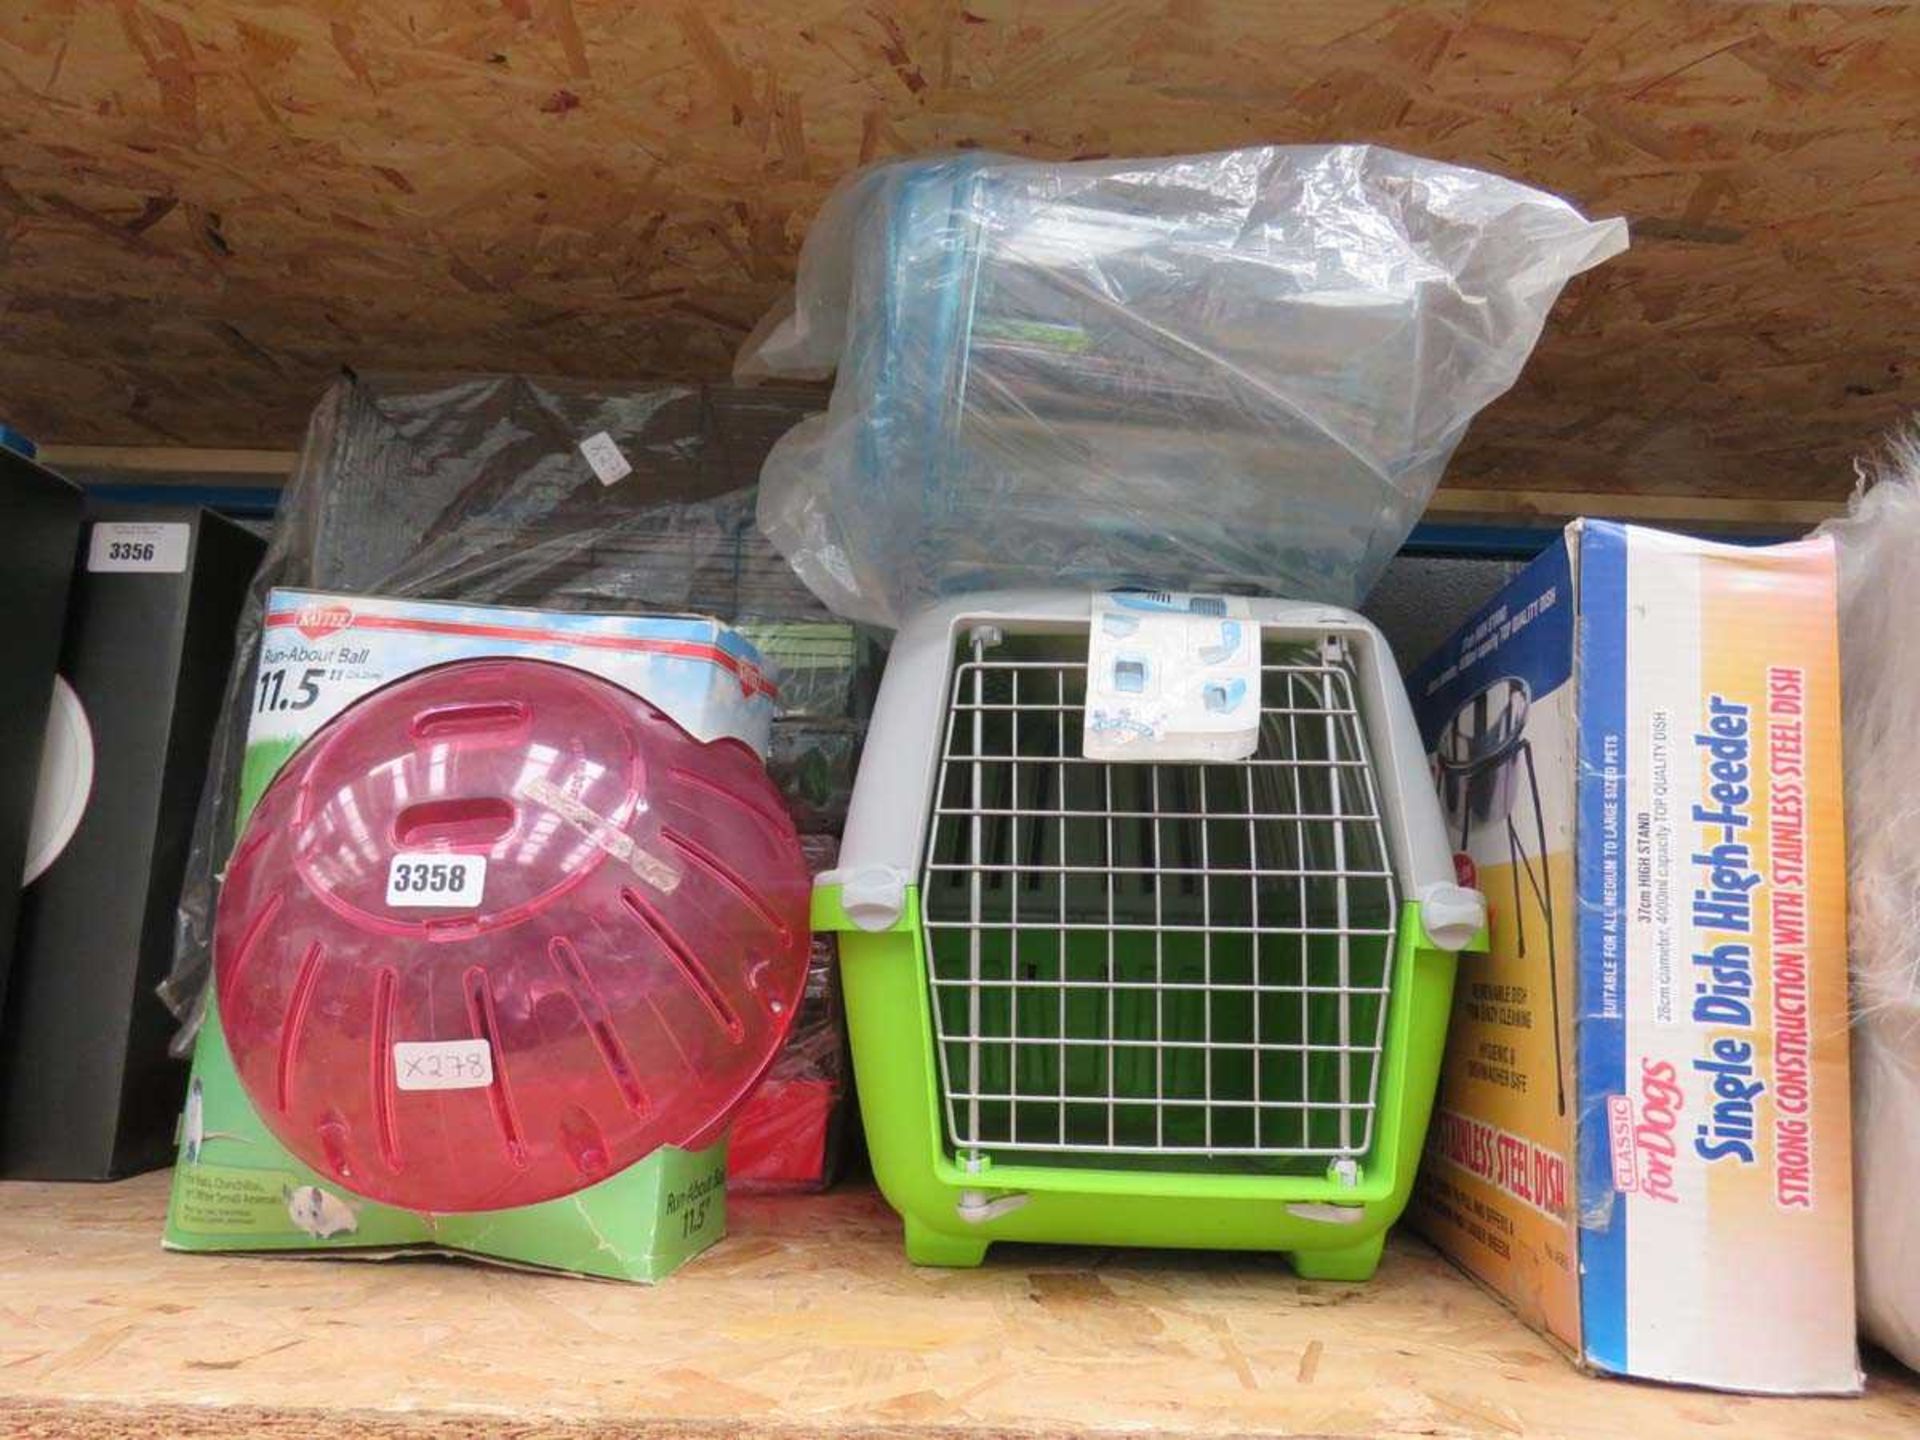 2 x hamster cages, hamster ball, small pet carrier, single dish high feeder etc.